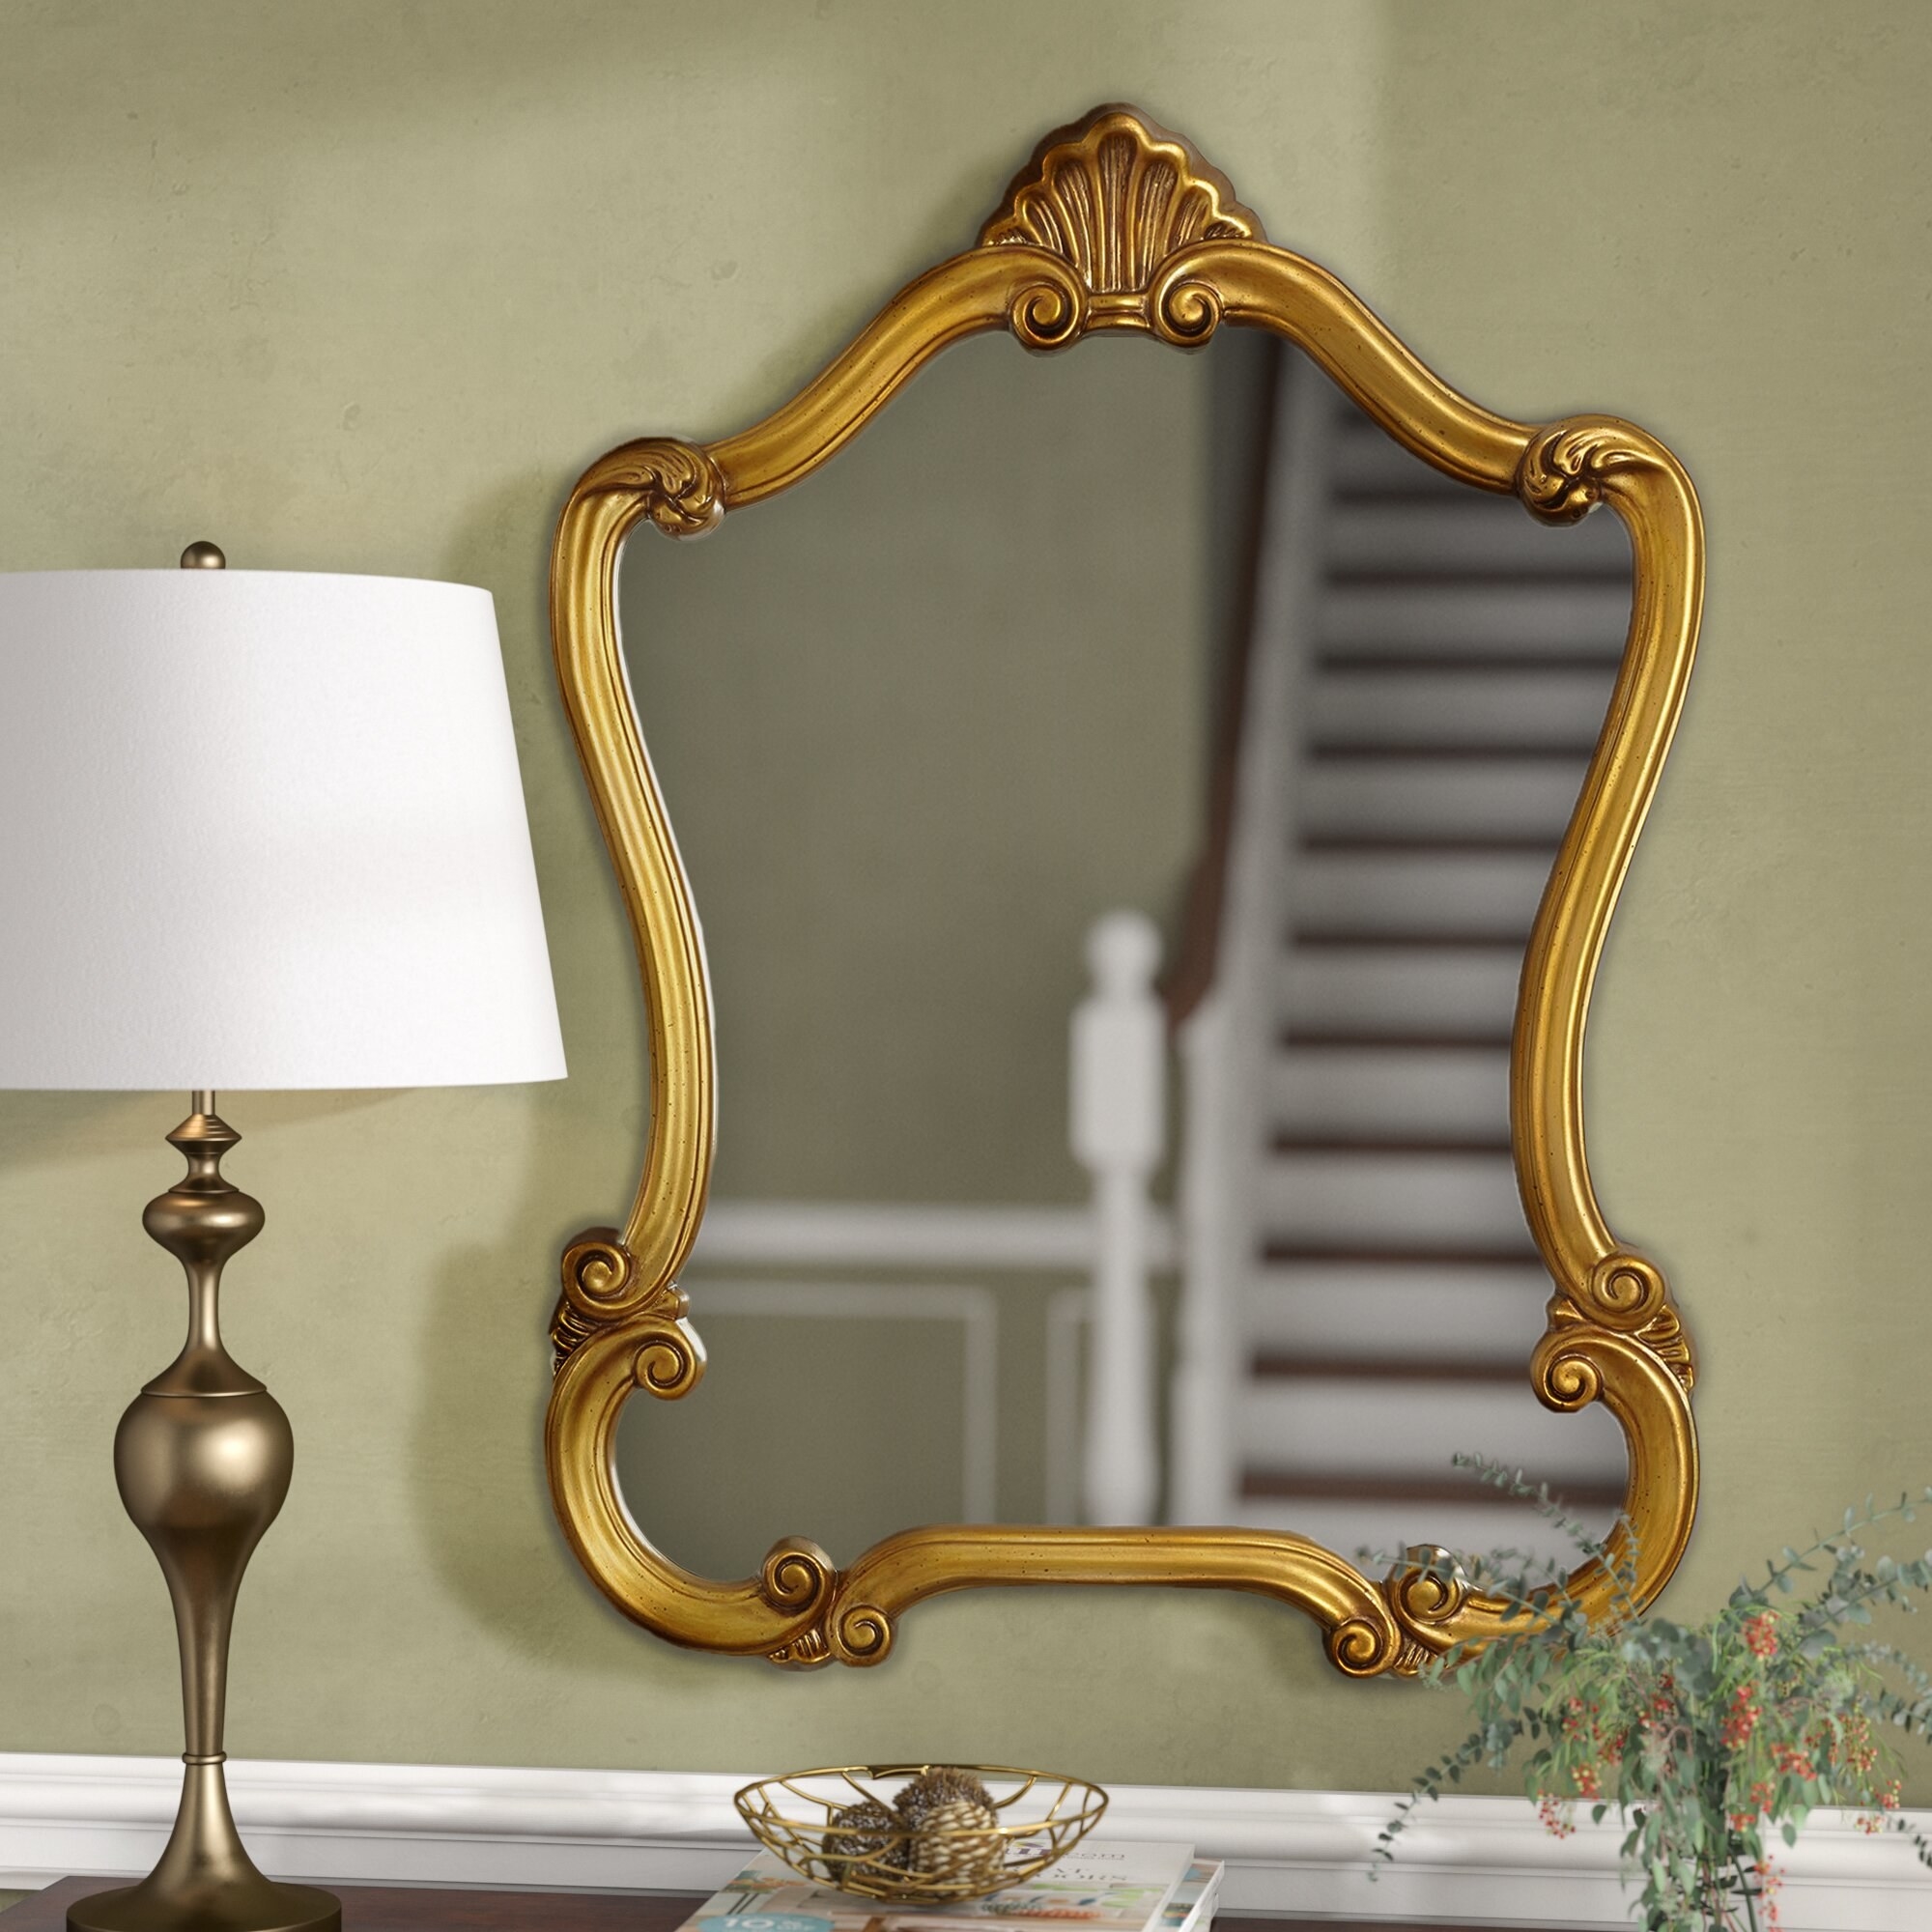 The accent mirror in gold